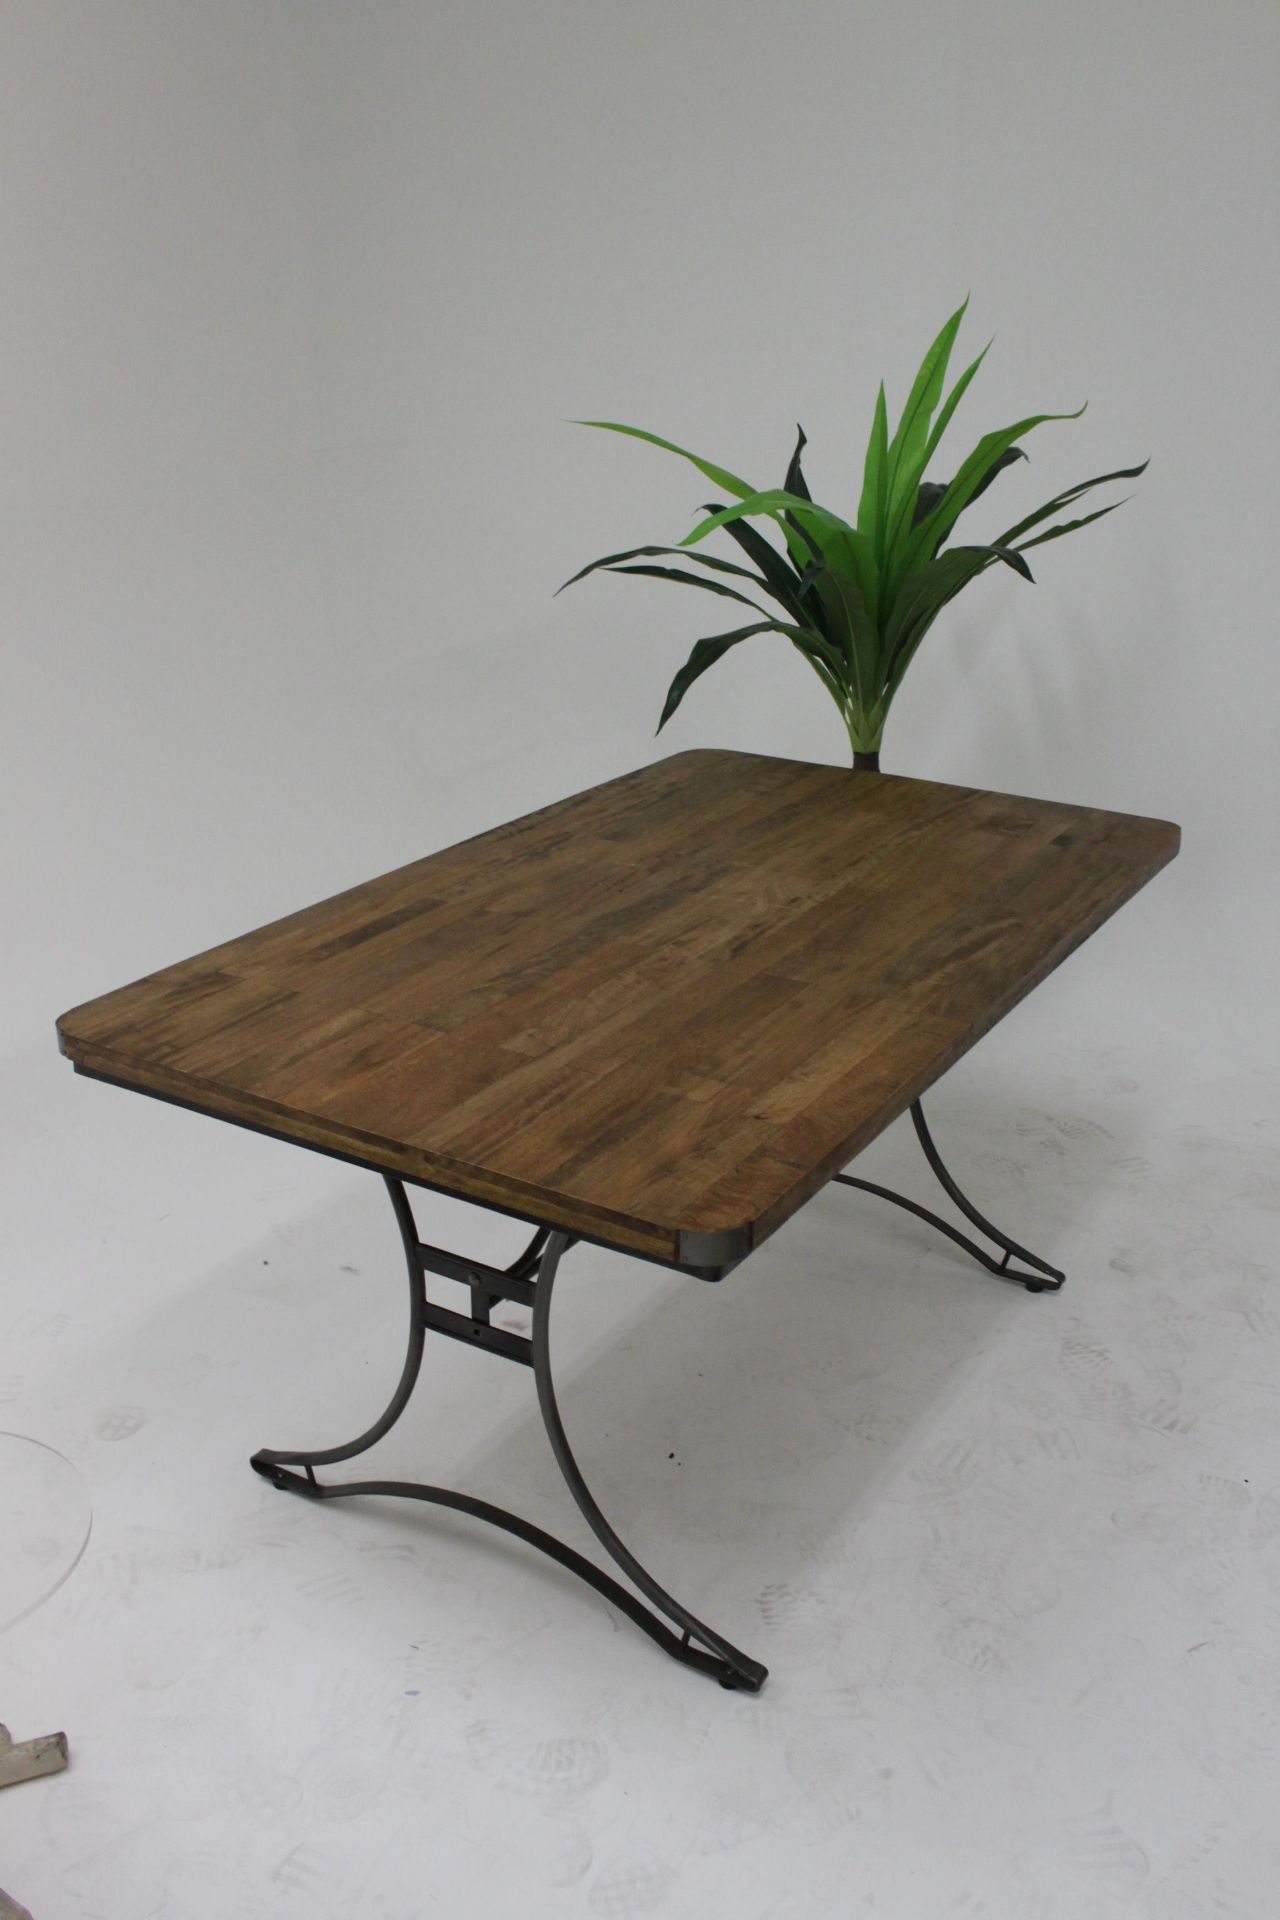 Re-Engineered Rectangular Table A Stunning 5ft Solid Mango Wood Dining Table With A Solid Steel - Image 3 of 3